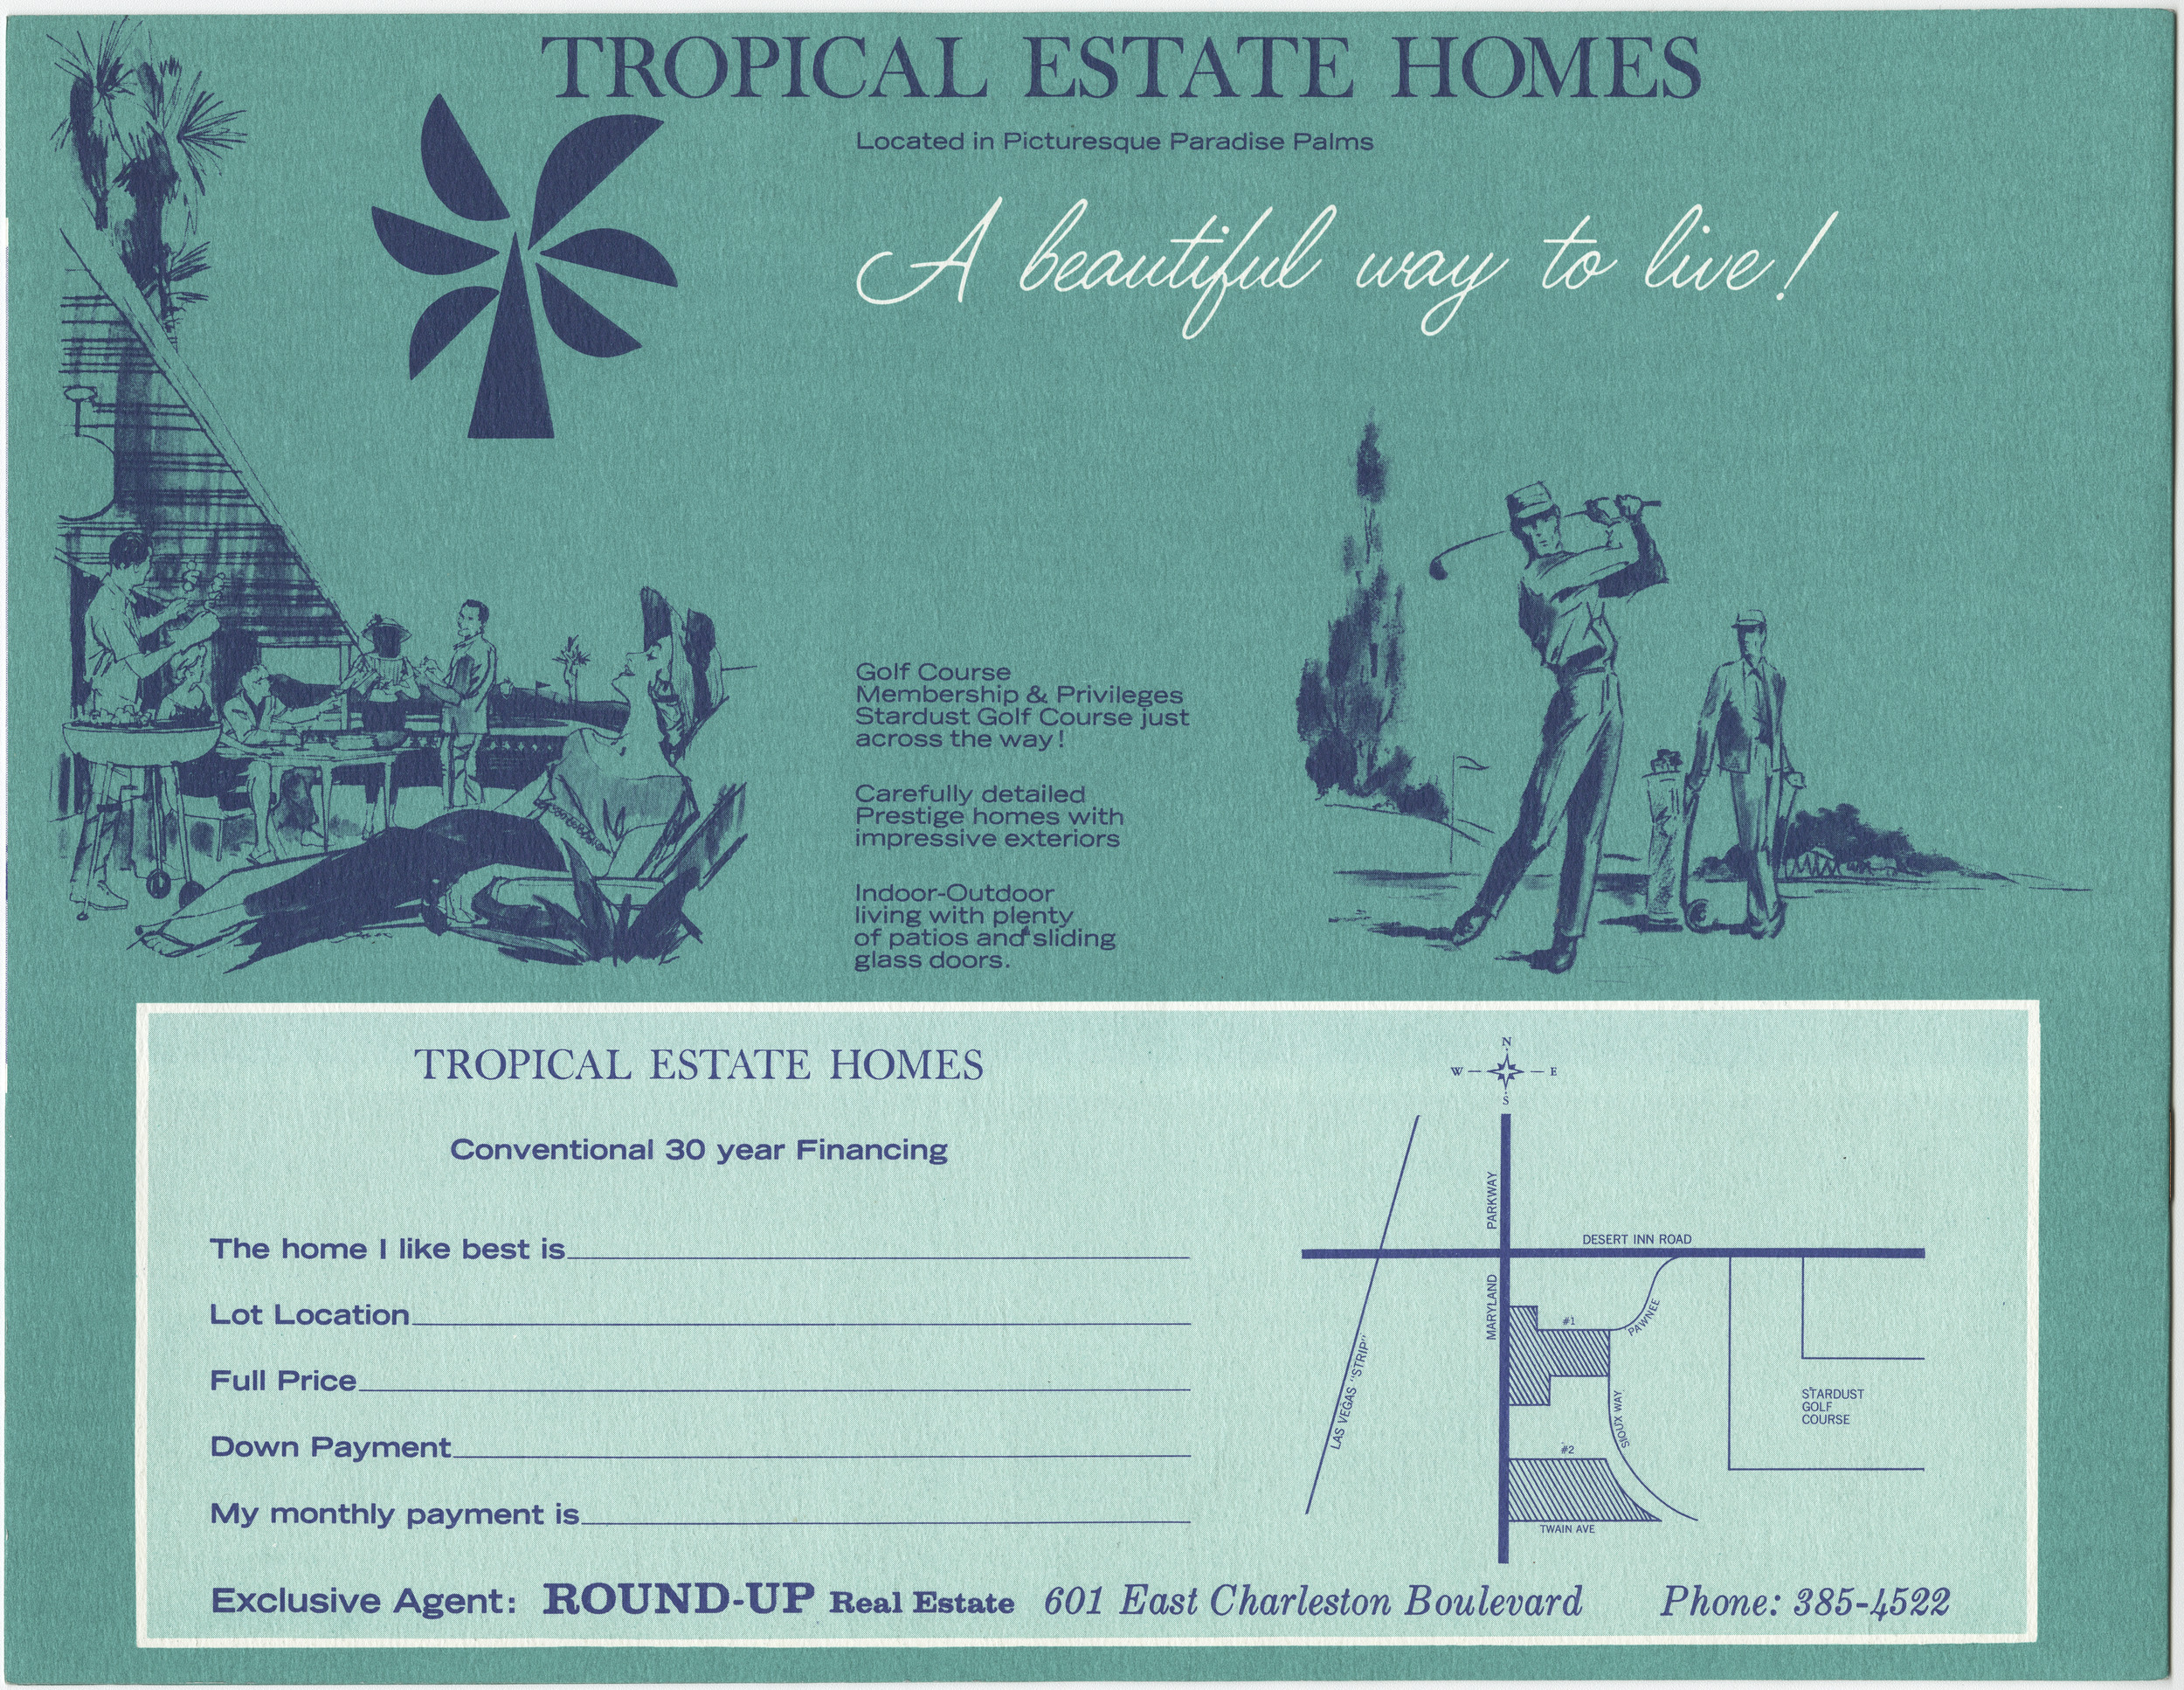 Brochure for Tropical Estate Homes in Paradise Palms development, Las Vegas, Nevada, page 8